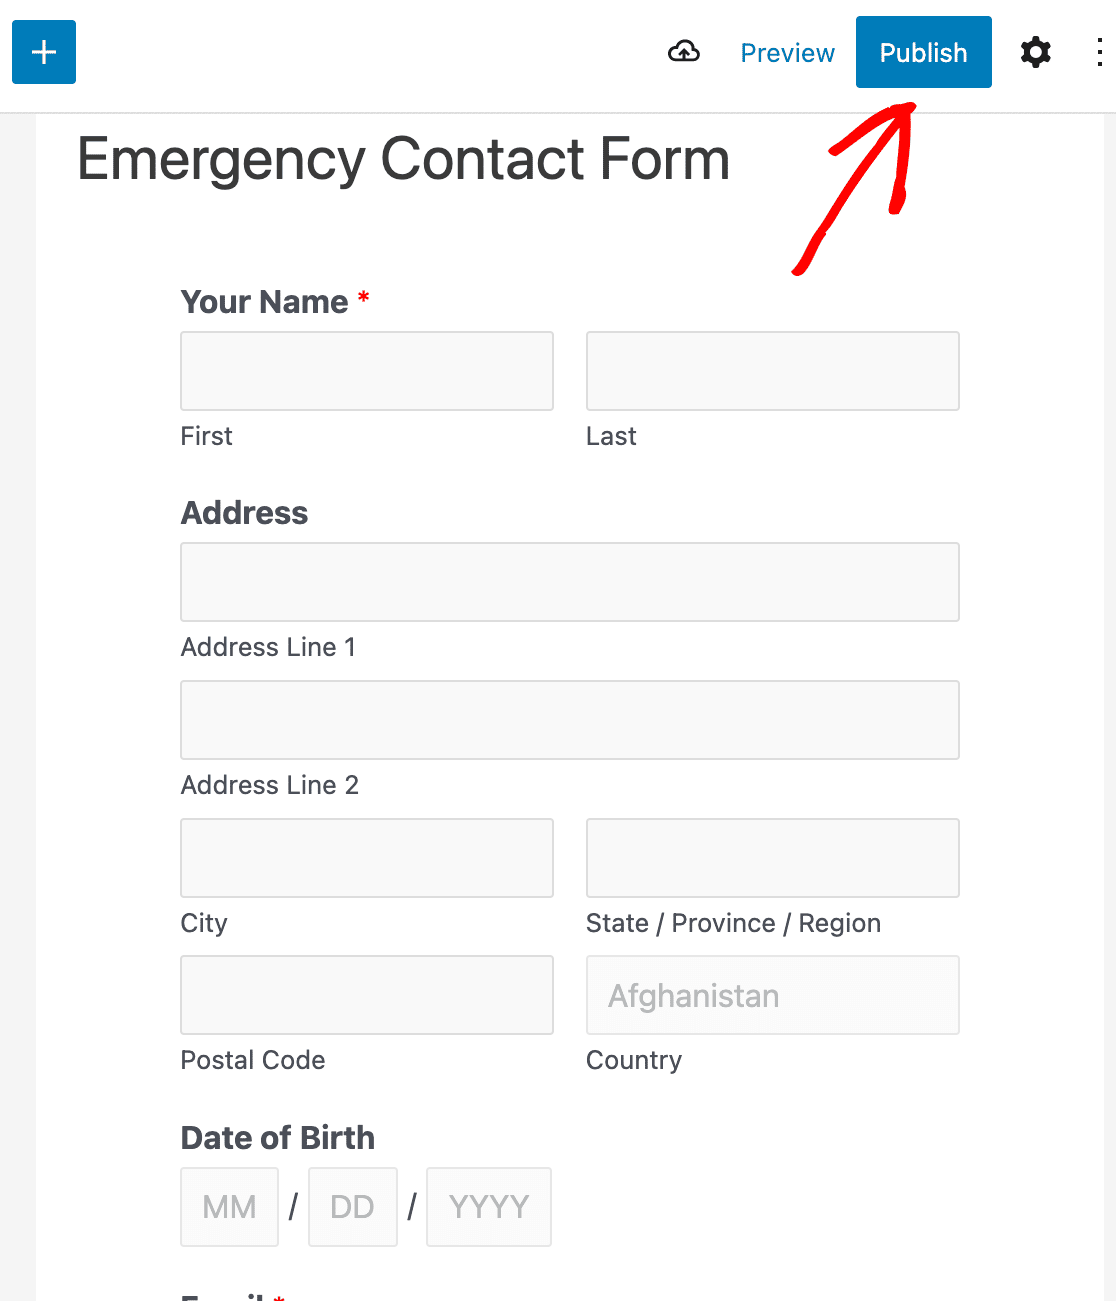 Publishing your emergency contact form